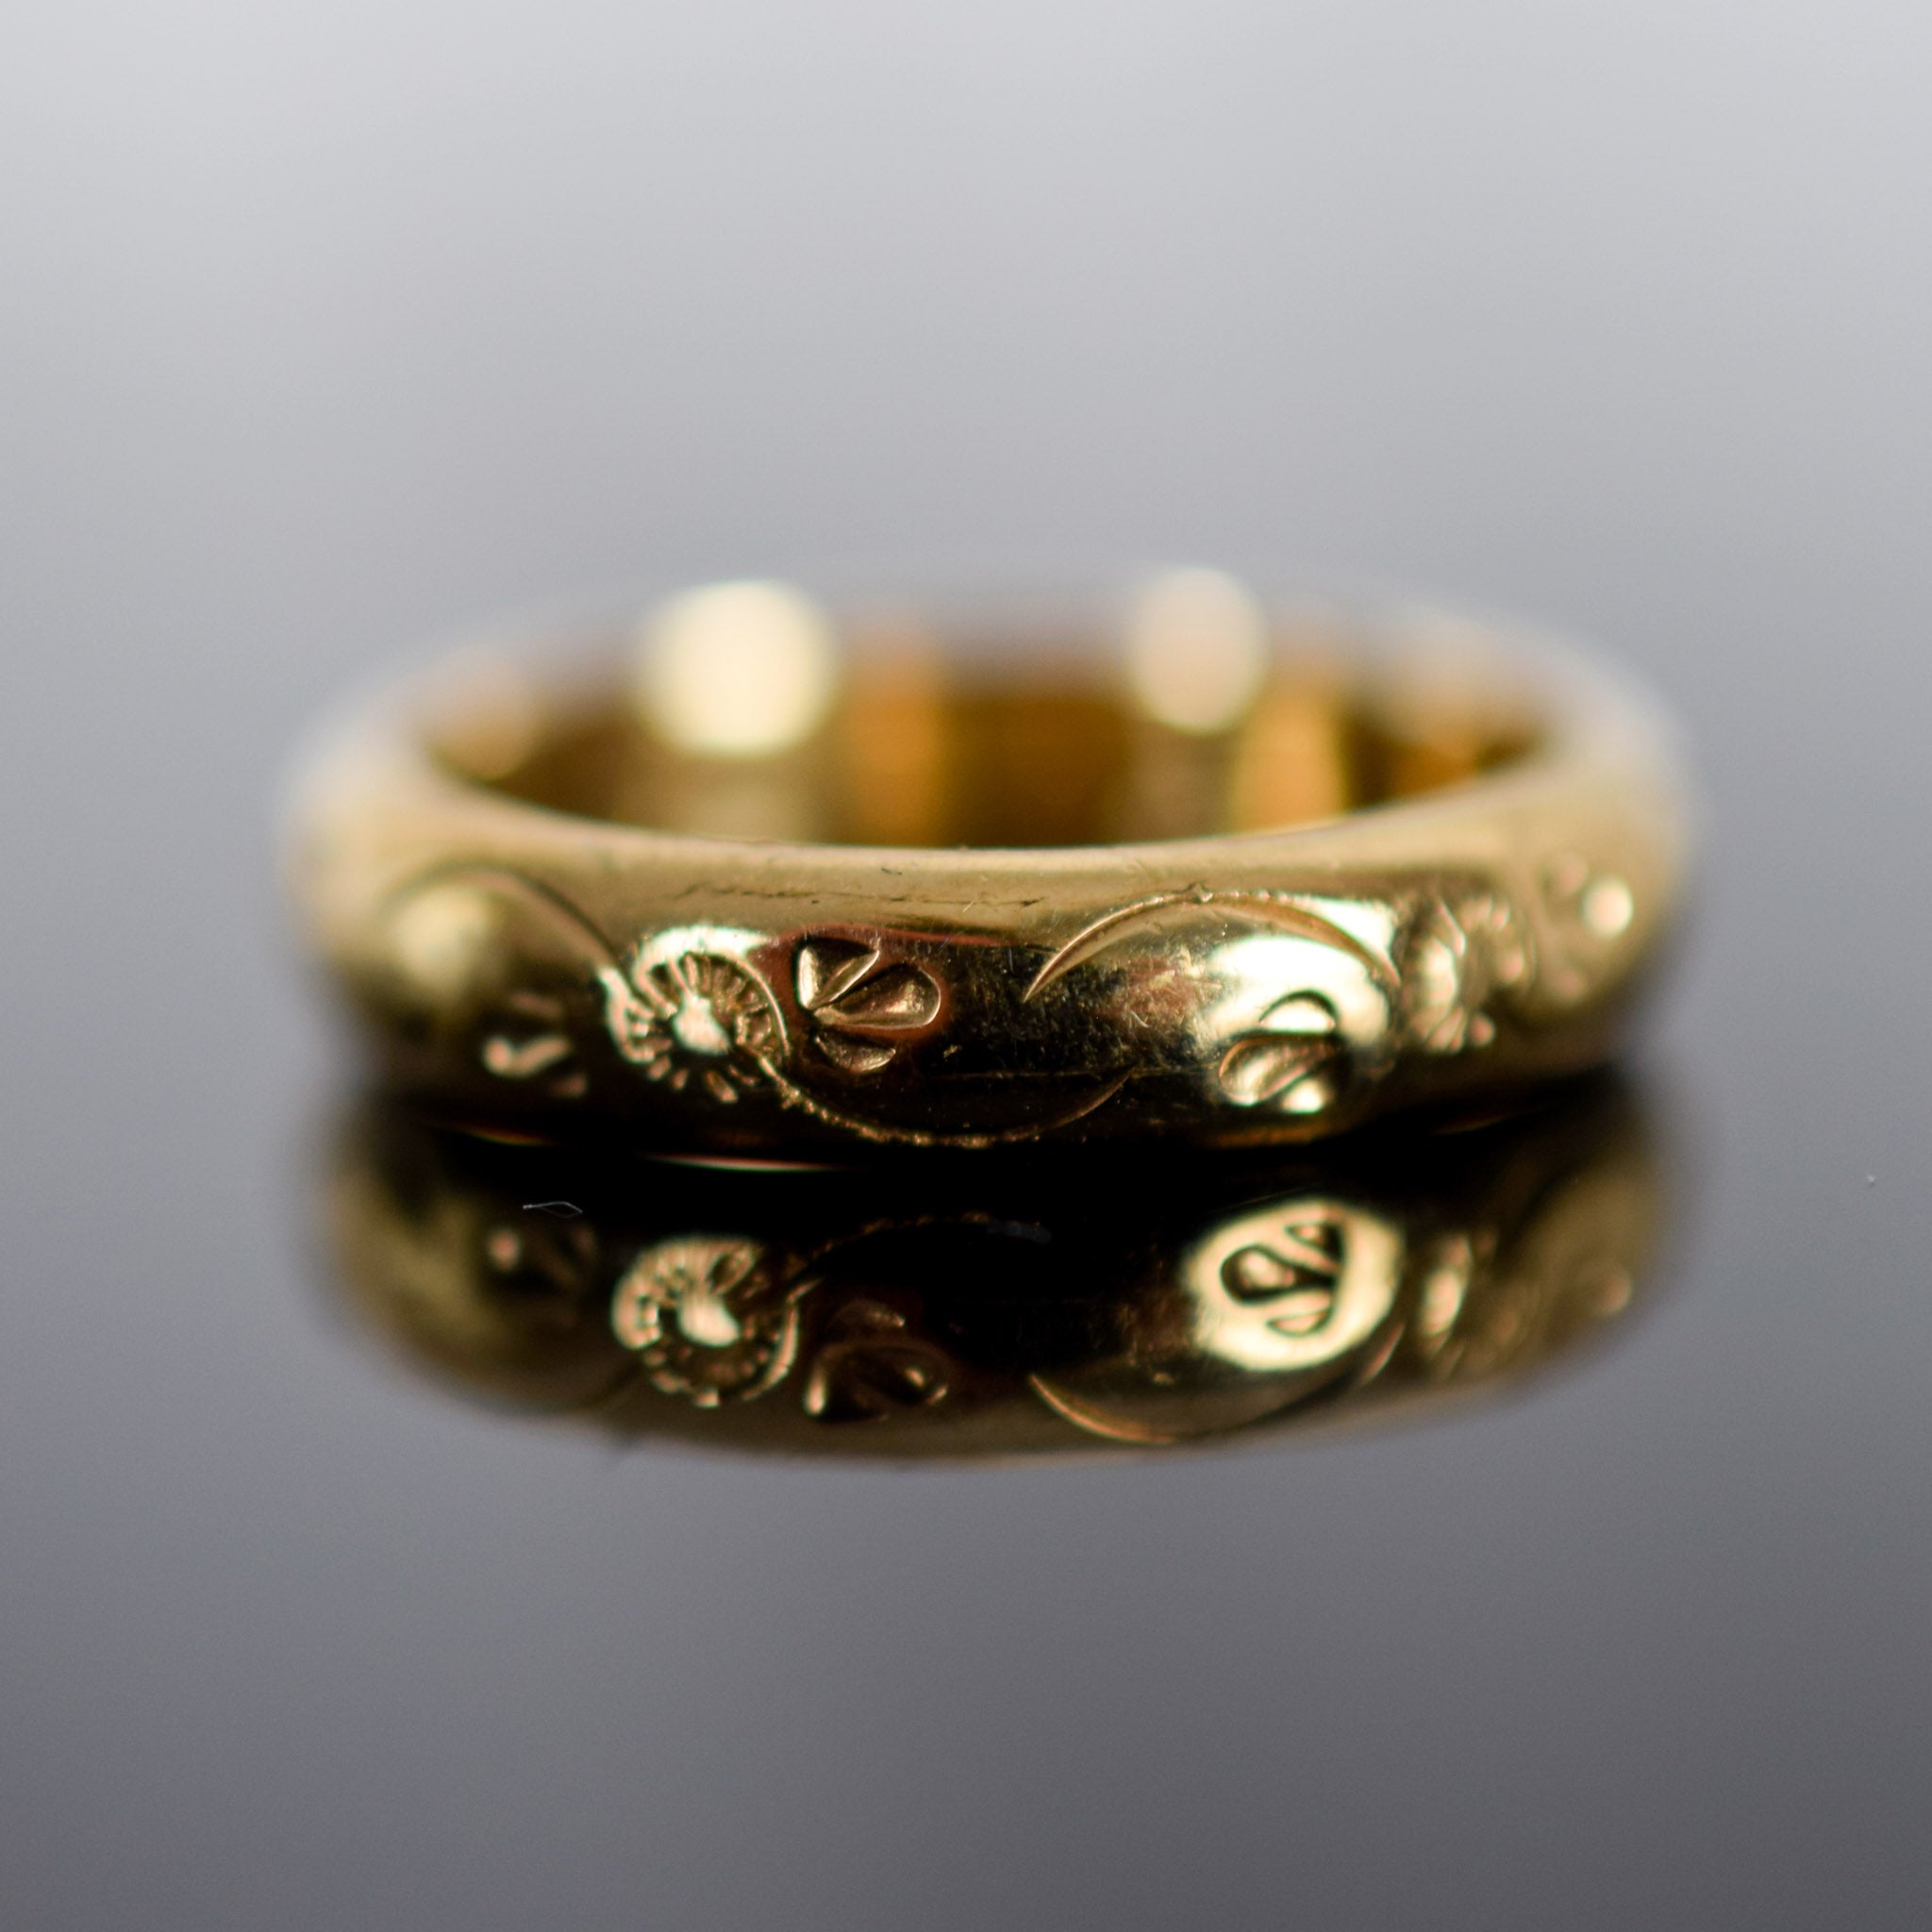 gorgeous gold band with floral etching, folklor vintage jewelry shop